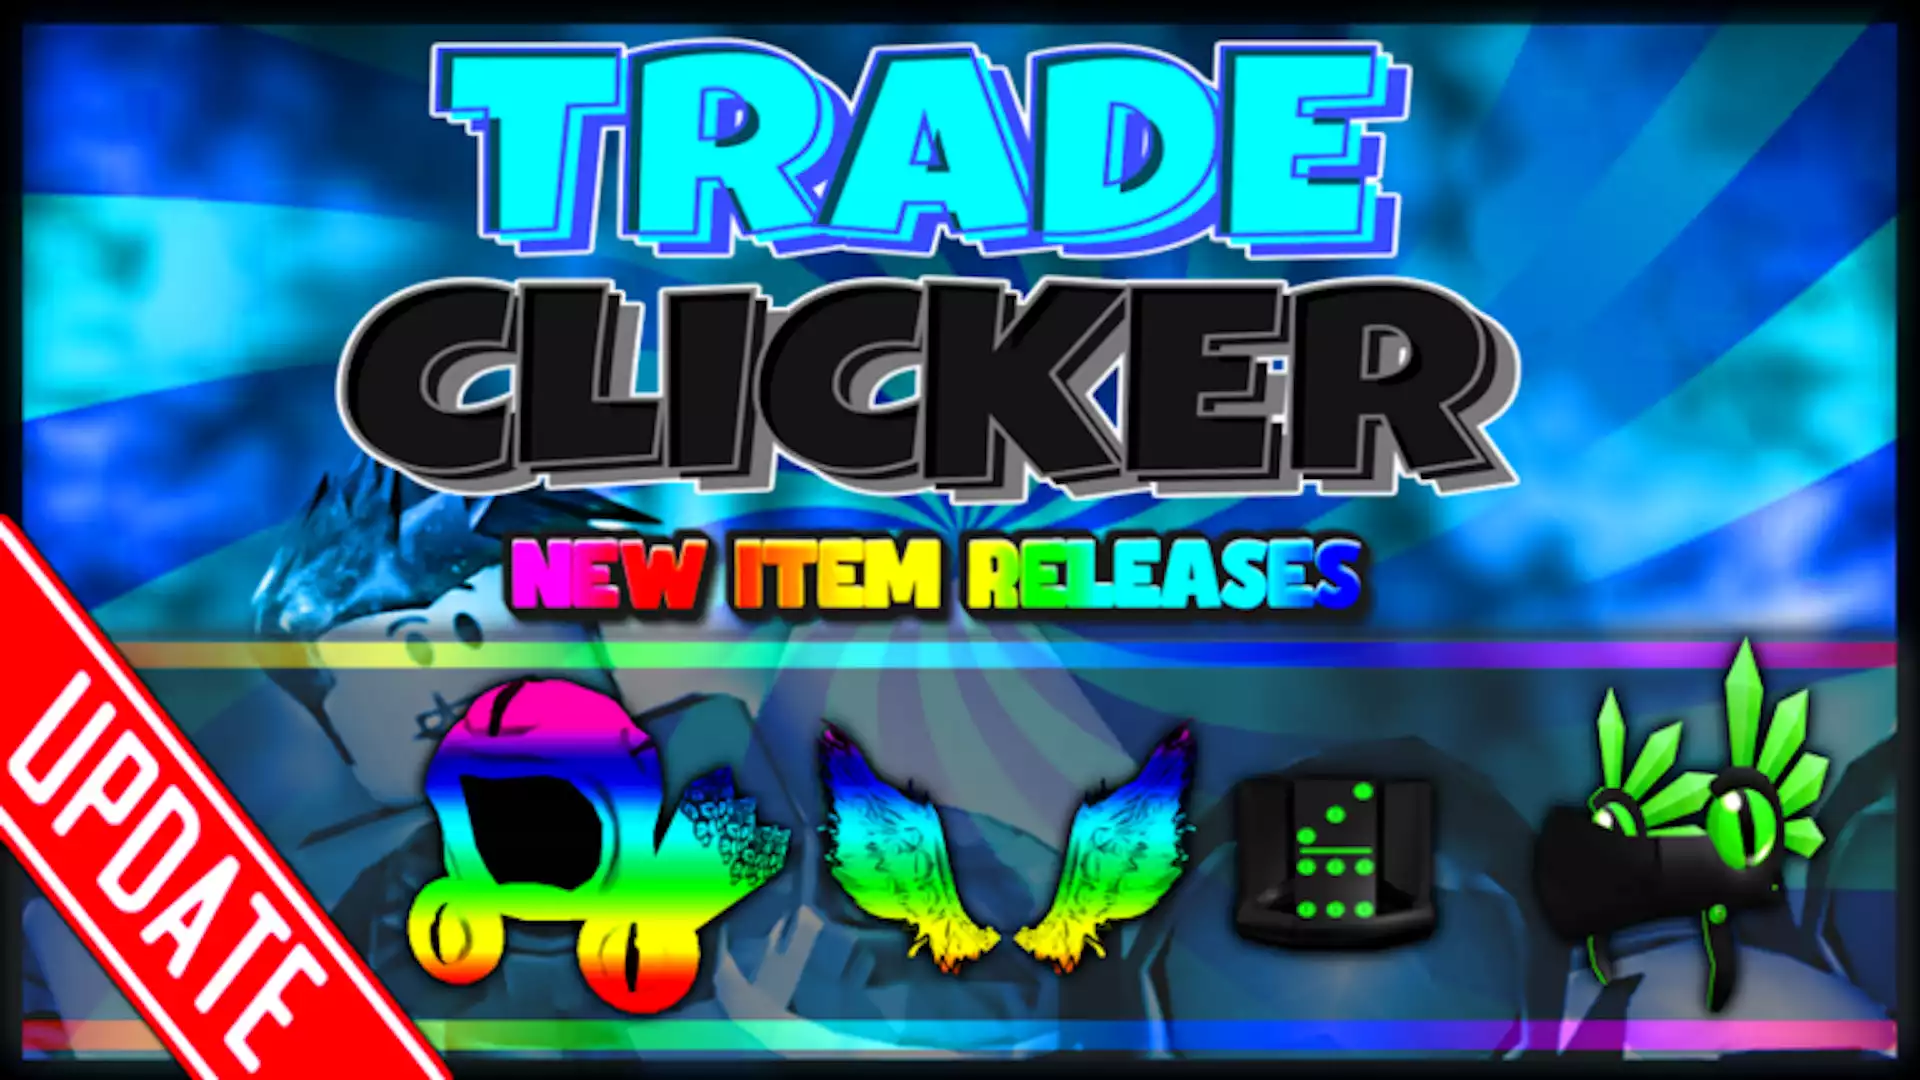 TRADE* ALL WORKING CODES FOR RACE CLICKER IN SEPTEMBER 2022